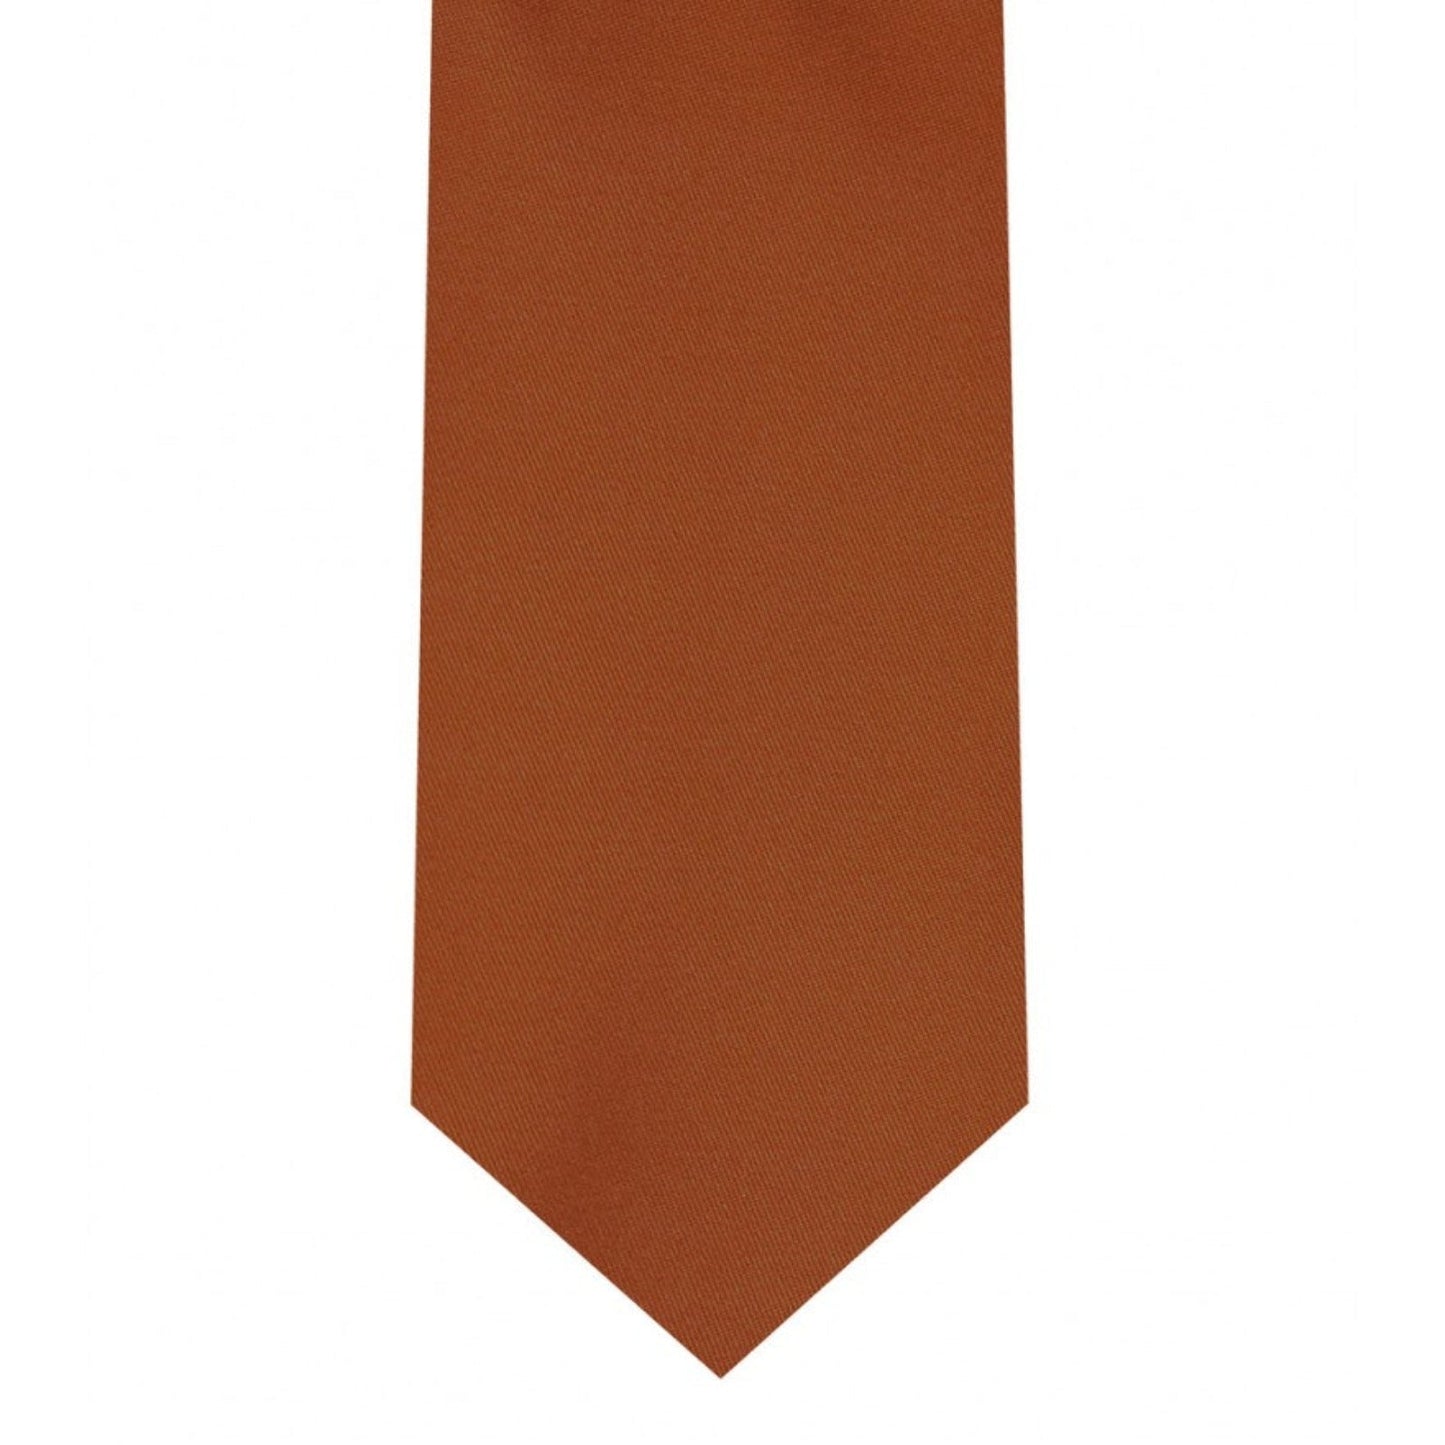 Classic Cinnamon Tie Skinny width 2.75 inches With Matching Pocket Square | KCT Menswear